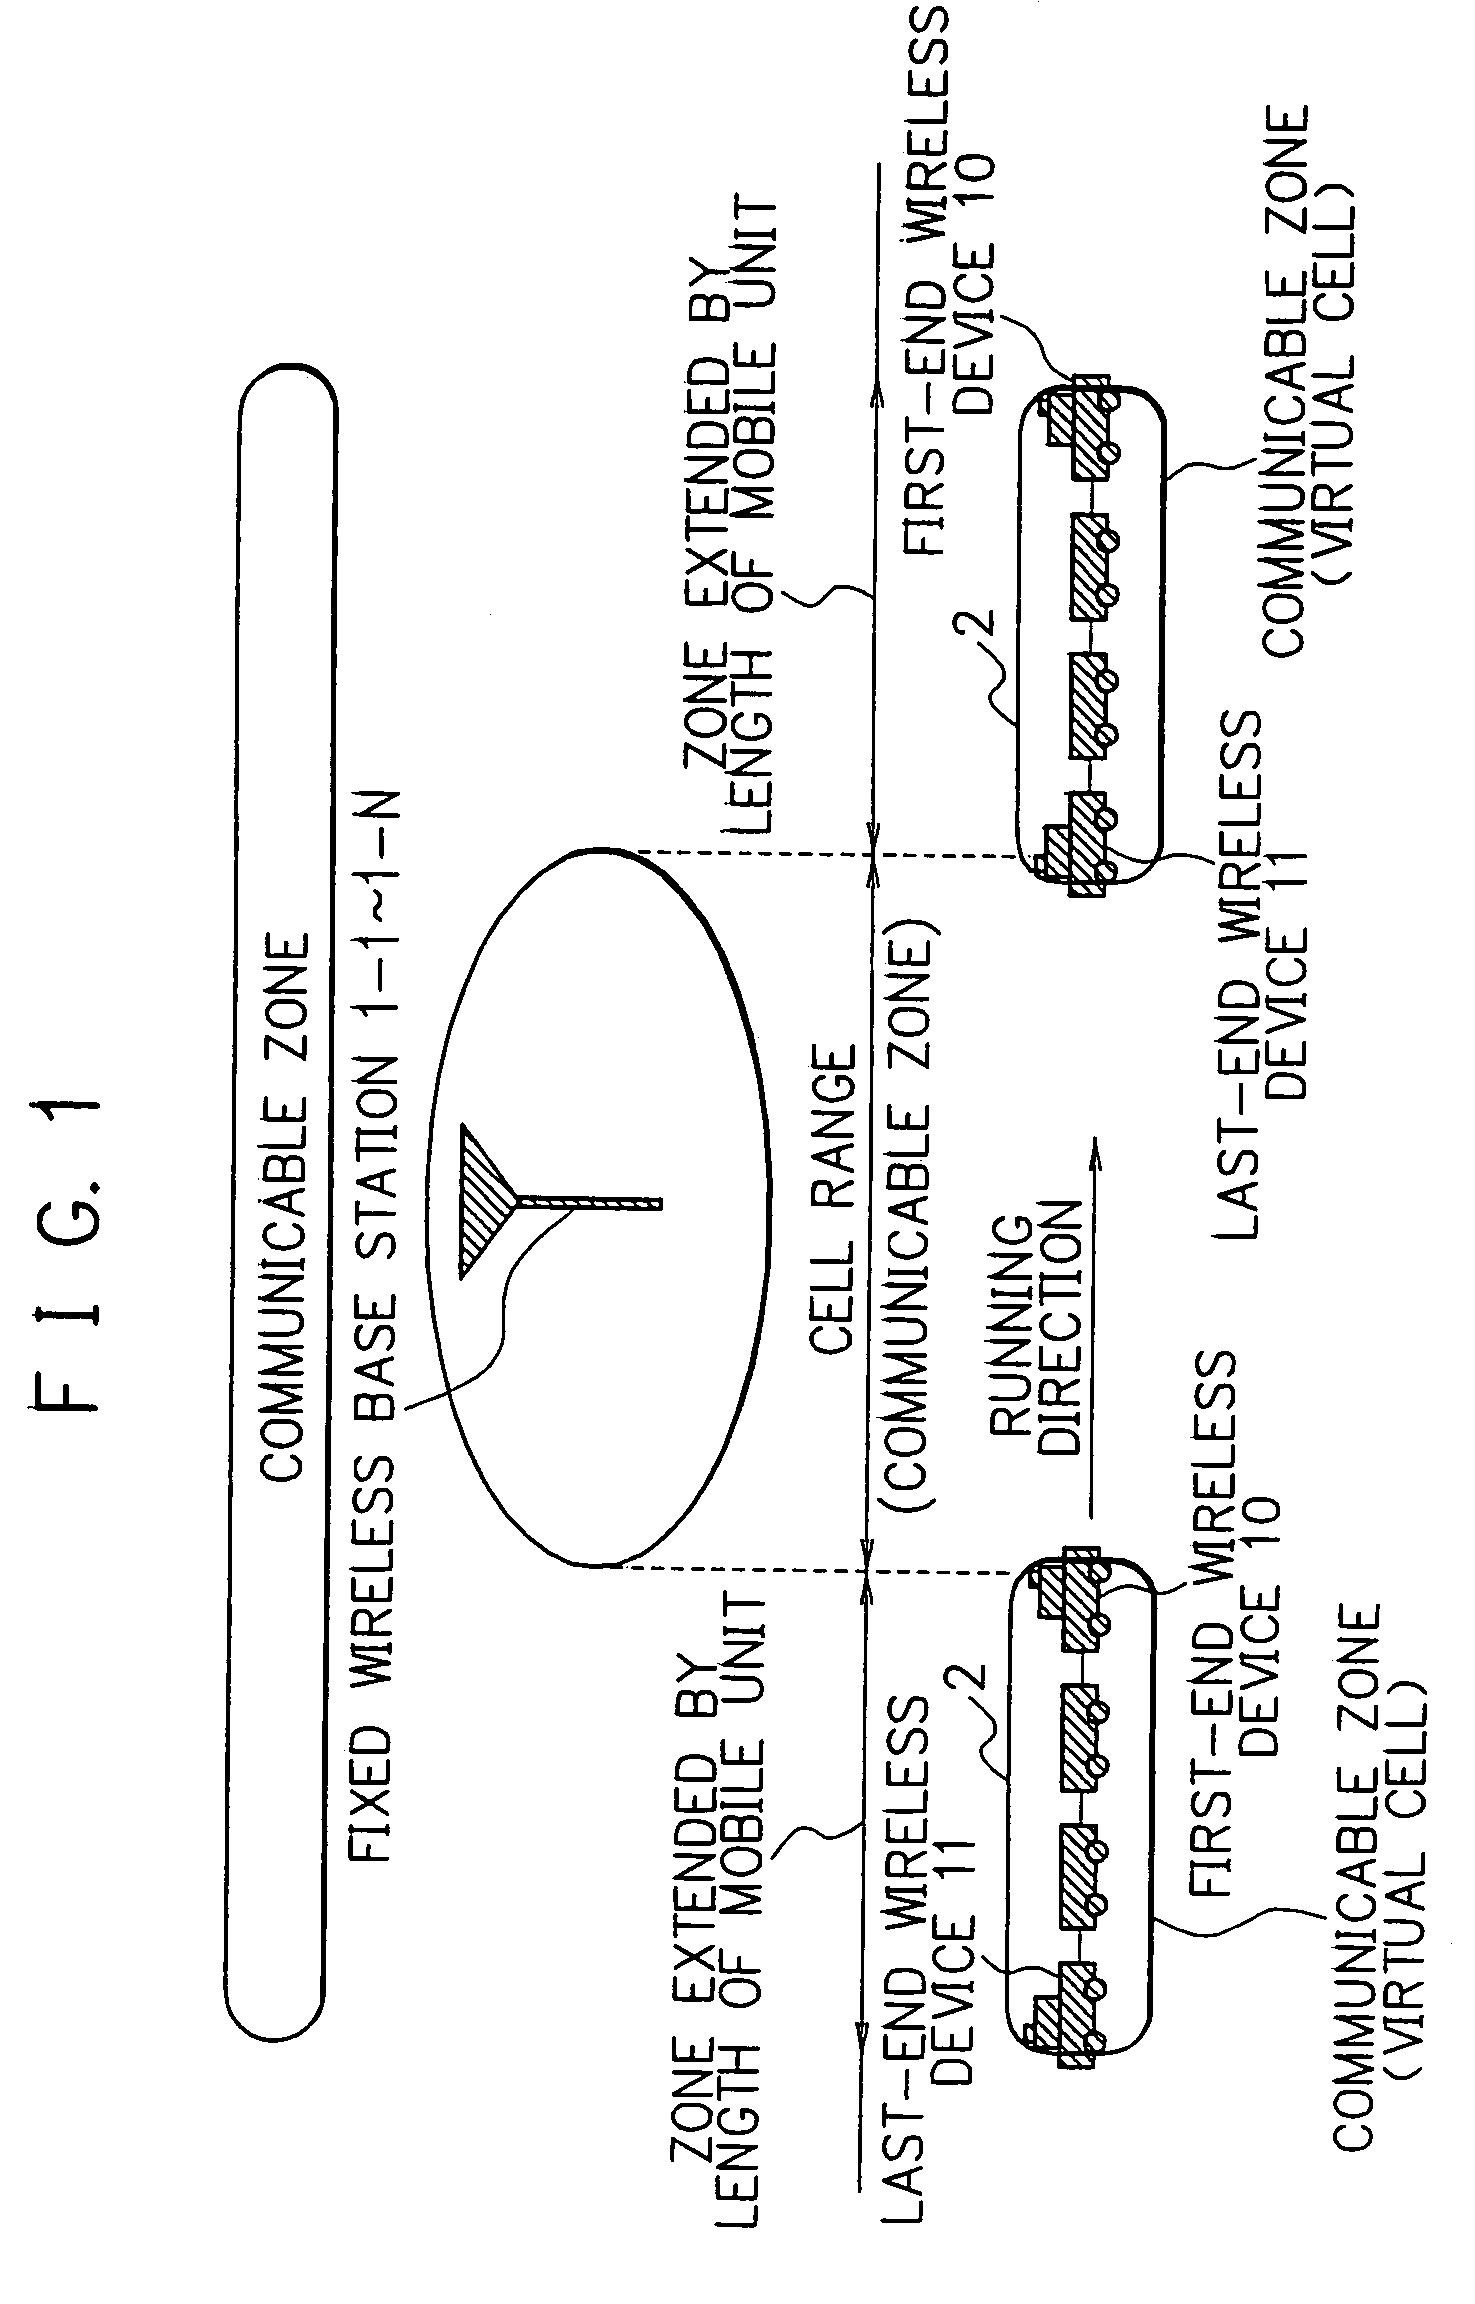 Handoff method for a communication system of a train